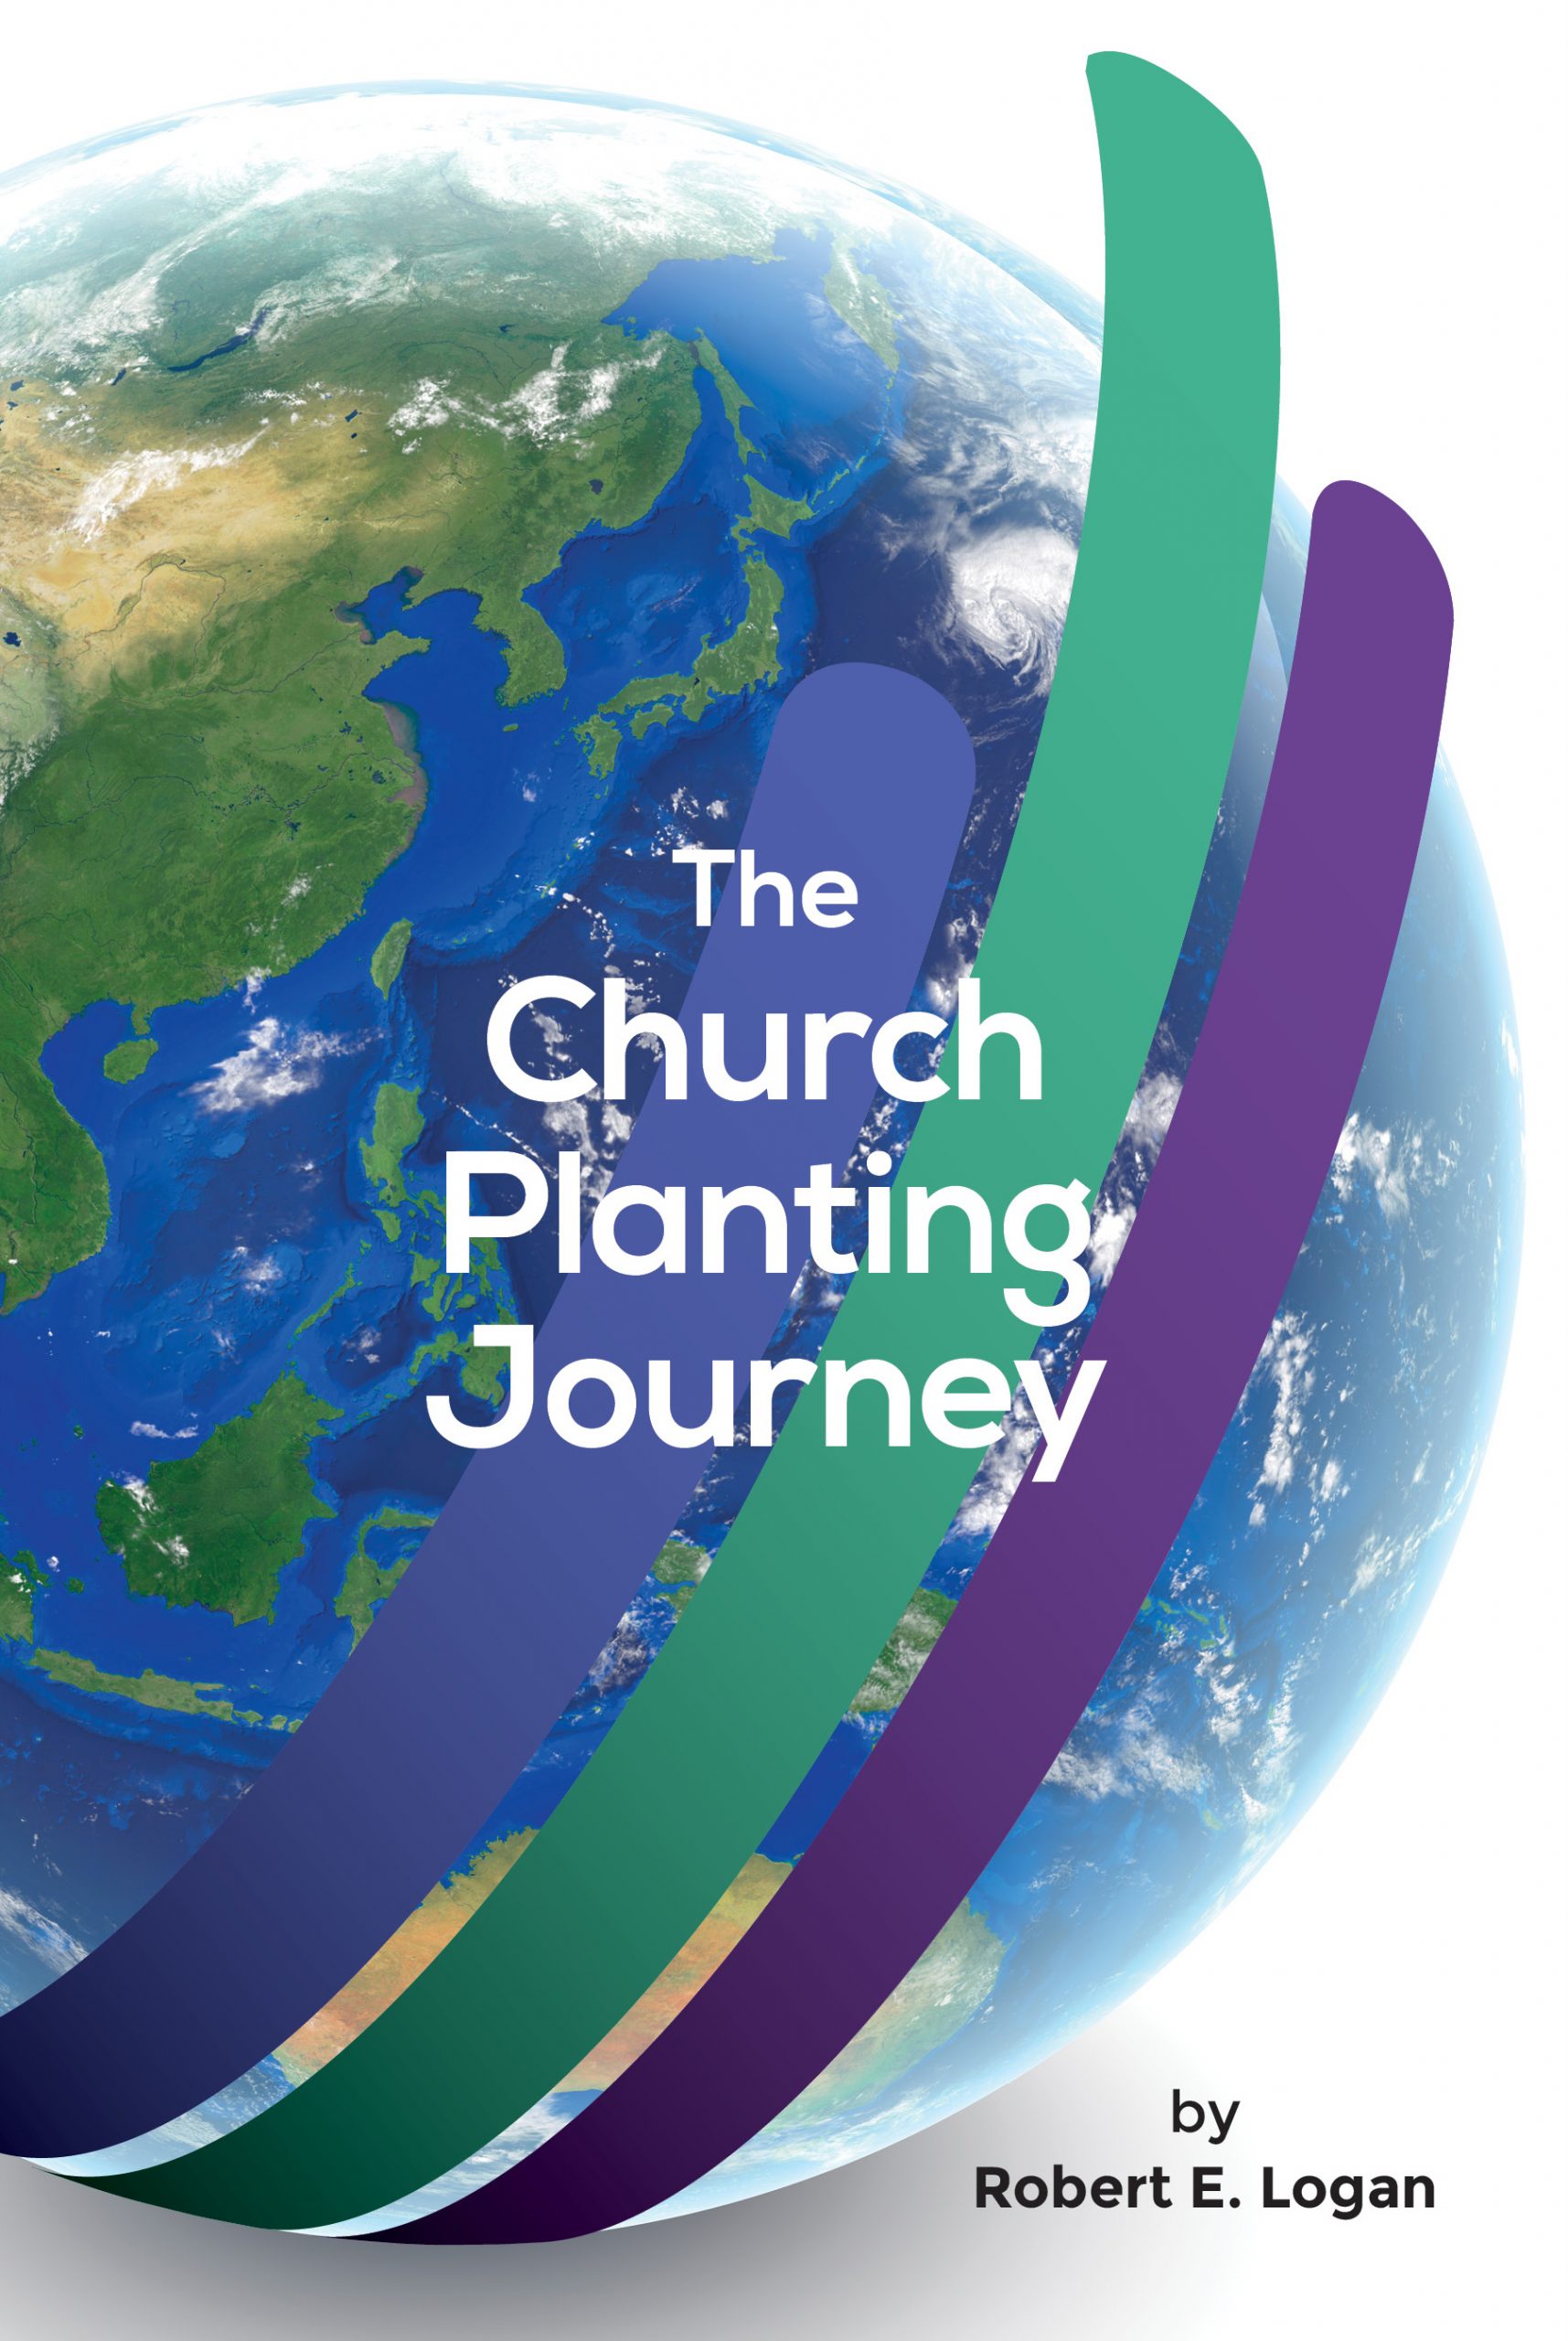 NOW AVAILABLE ON AMAZON- The Church Planting Journey!